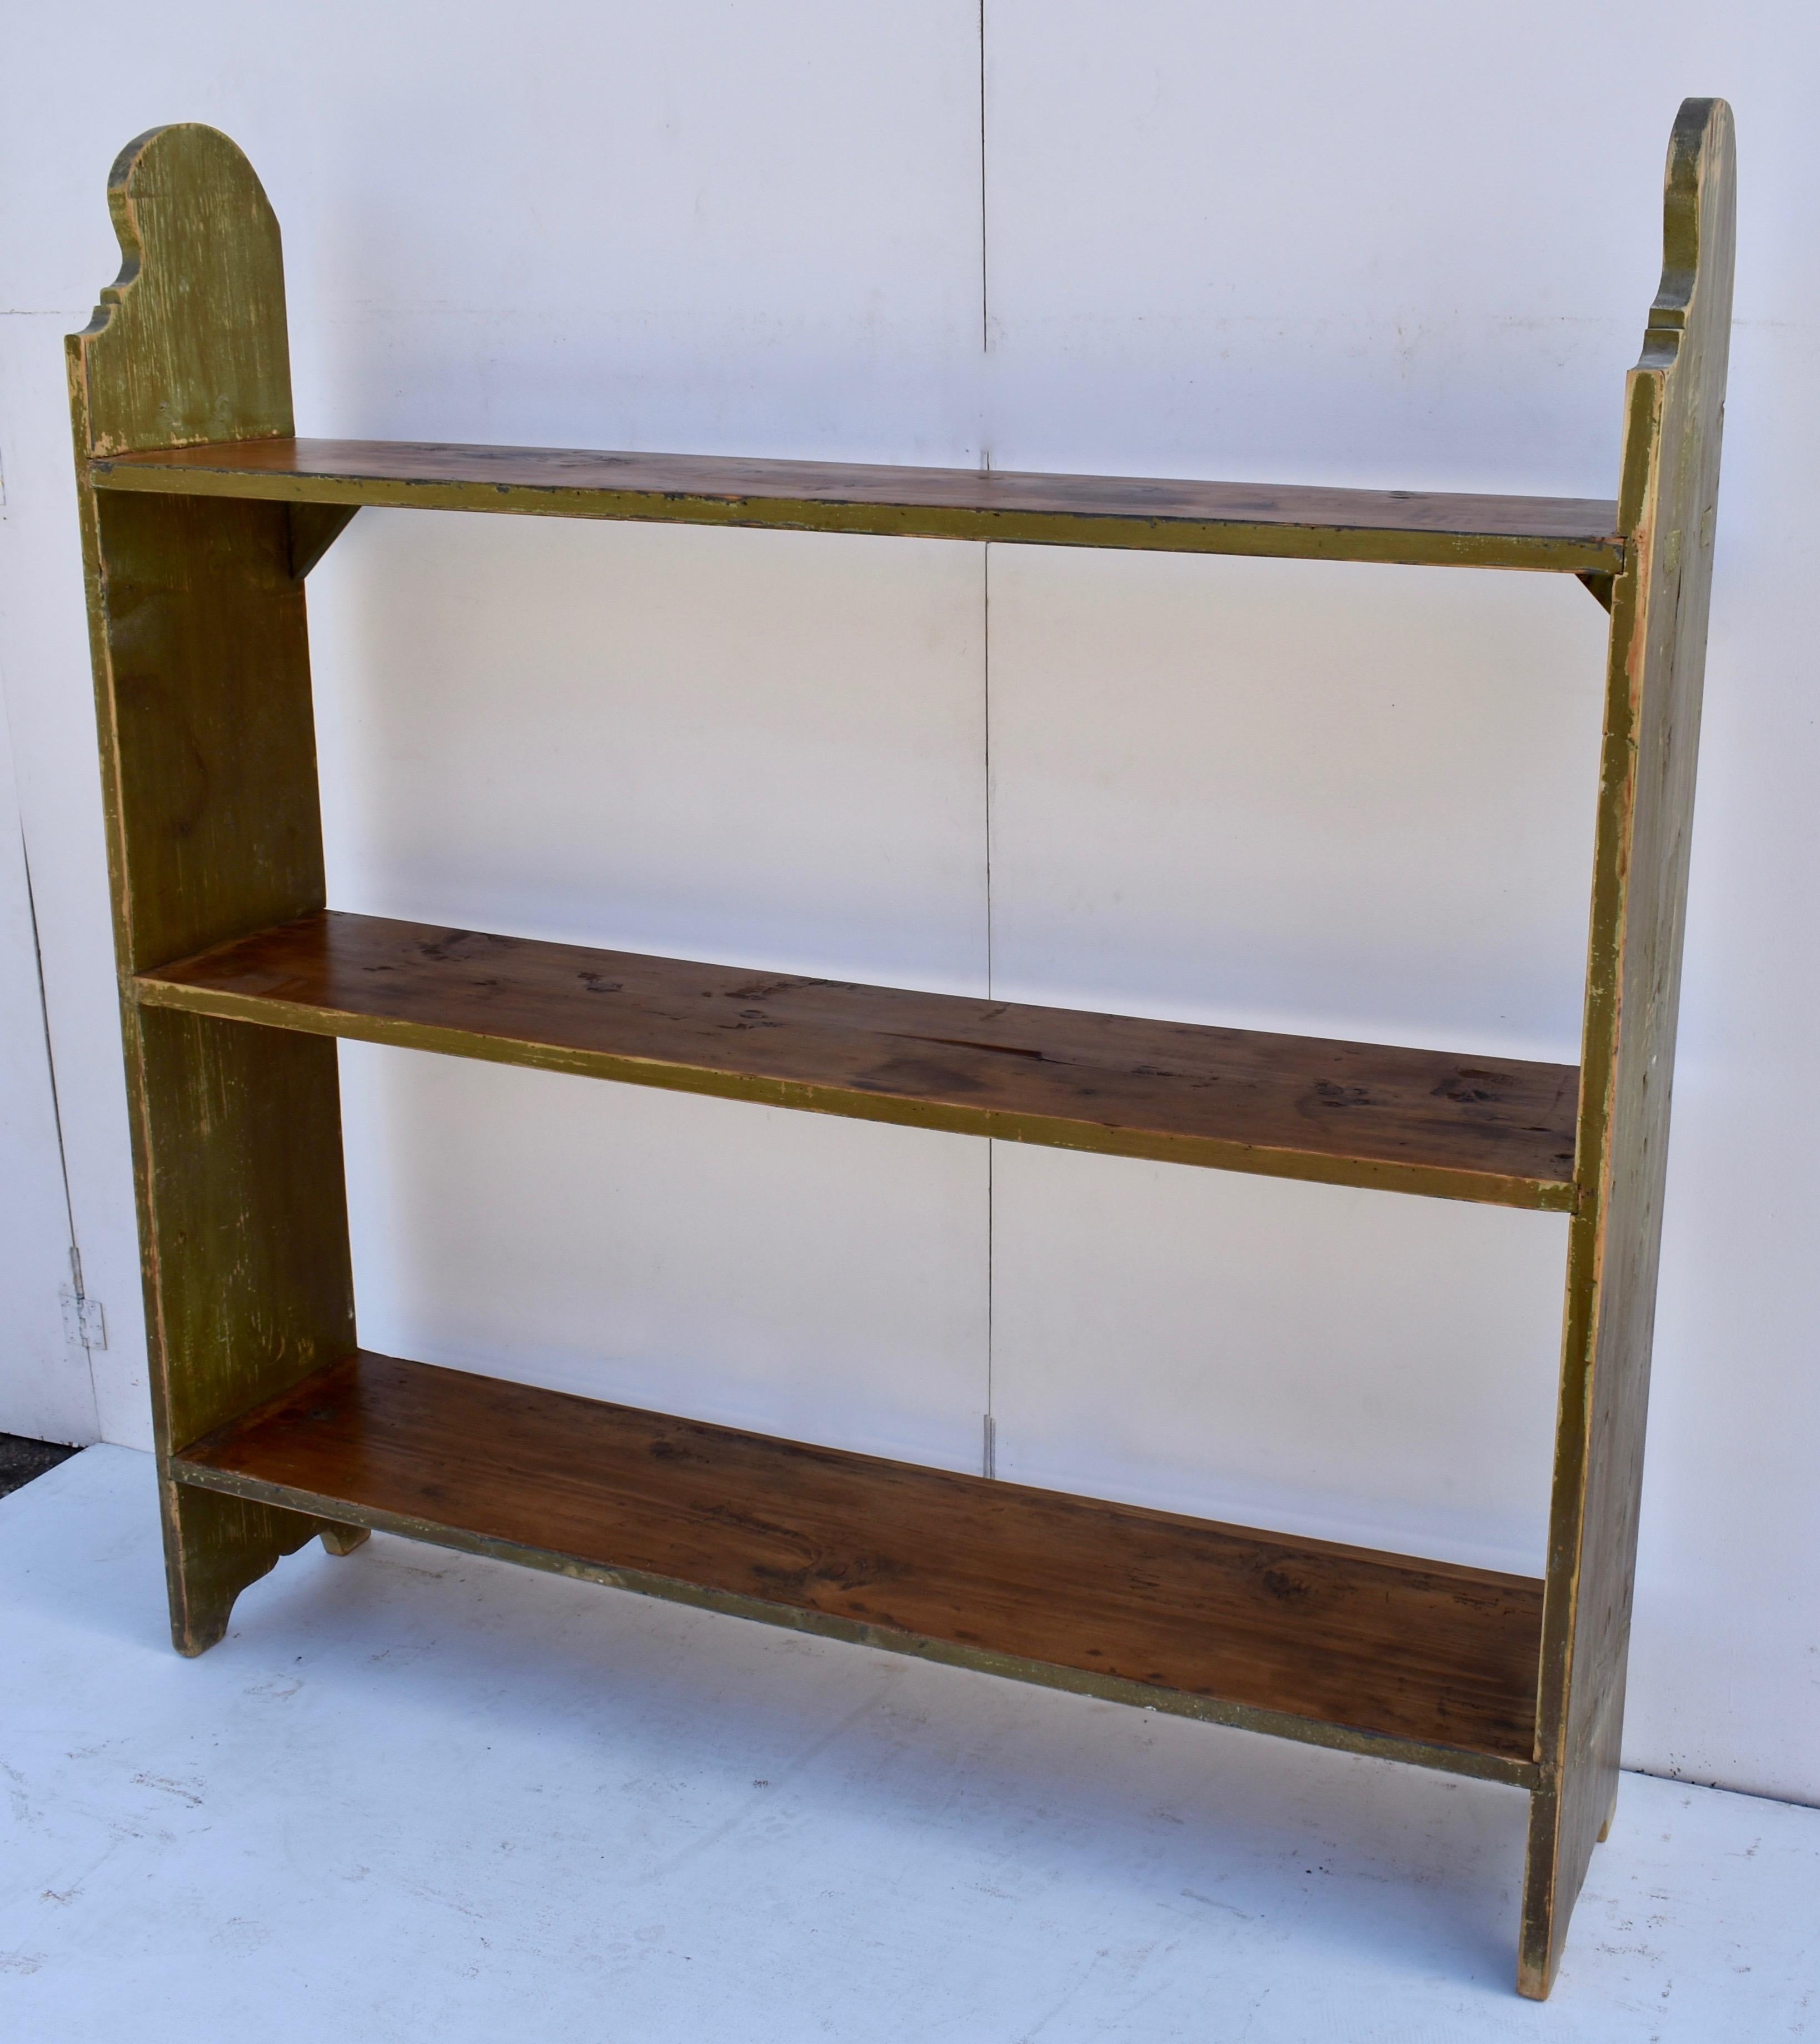 Painted Pine Bucket Bench or Utility Shelves In Good Condition For Sale In Baltimore, MD